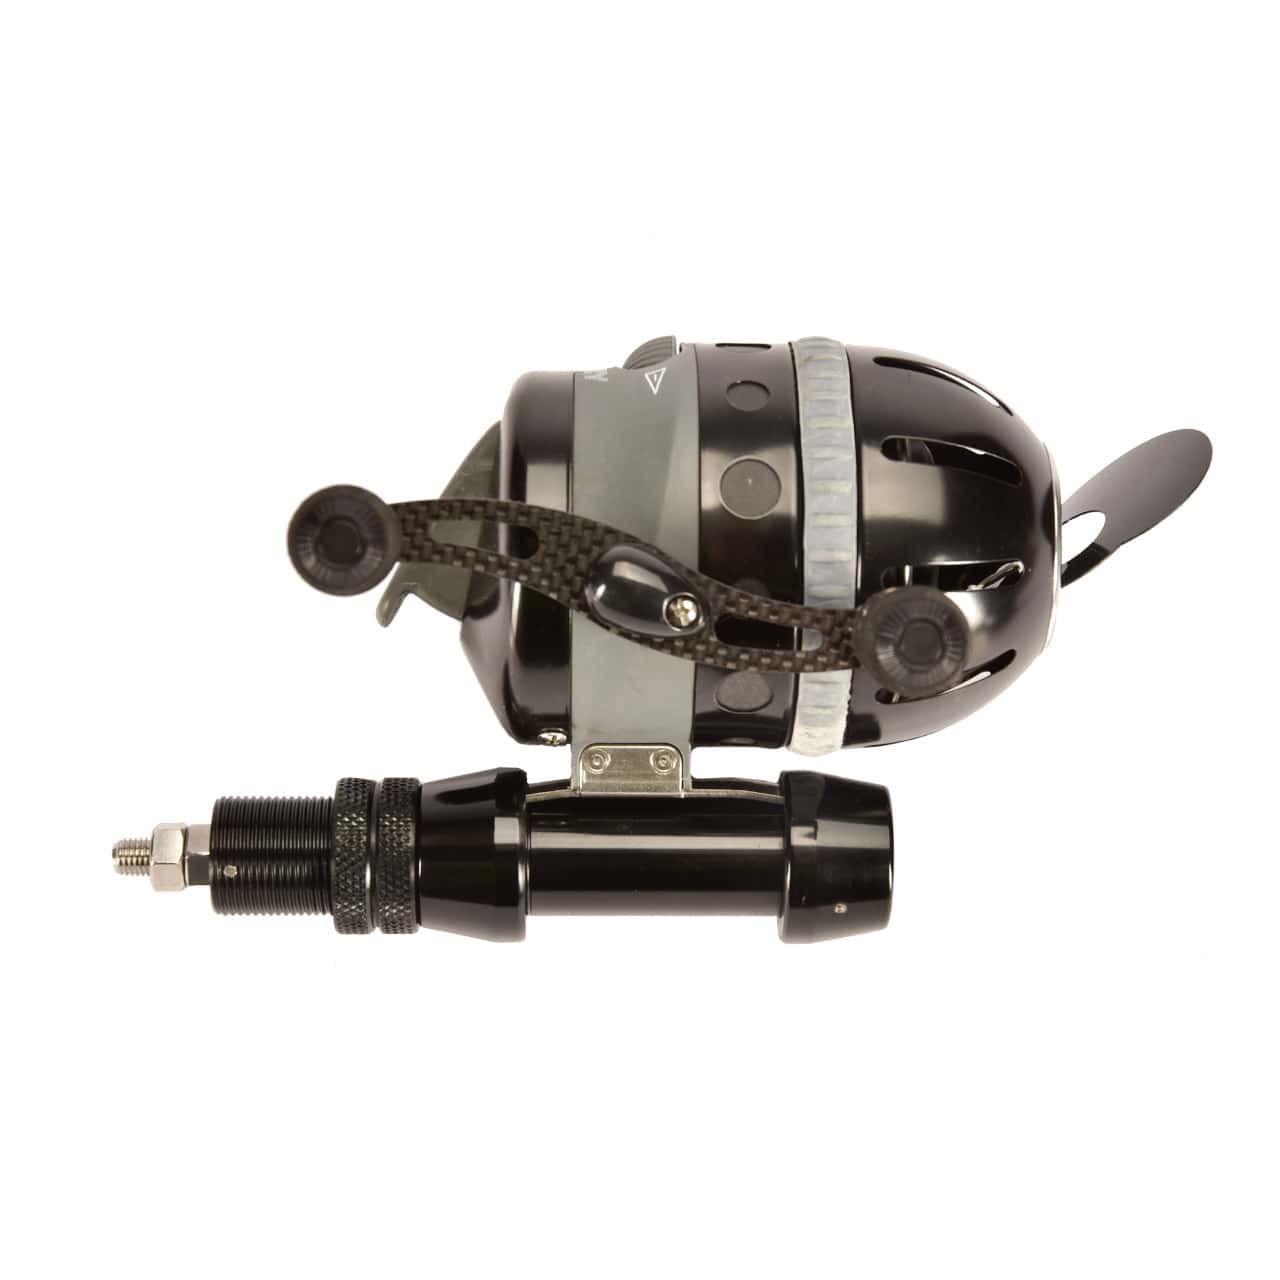 https://www.feradyne.com/wp-content/uploads/2022/03/products-mbf-anchor-reel-seat-with-reel__78494.1648662356.1280.1280.jpg